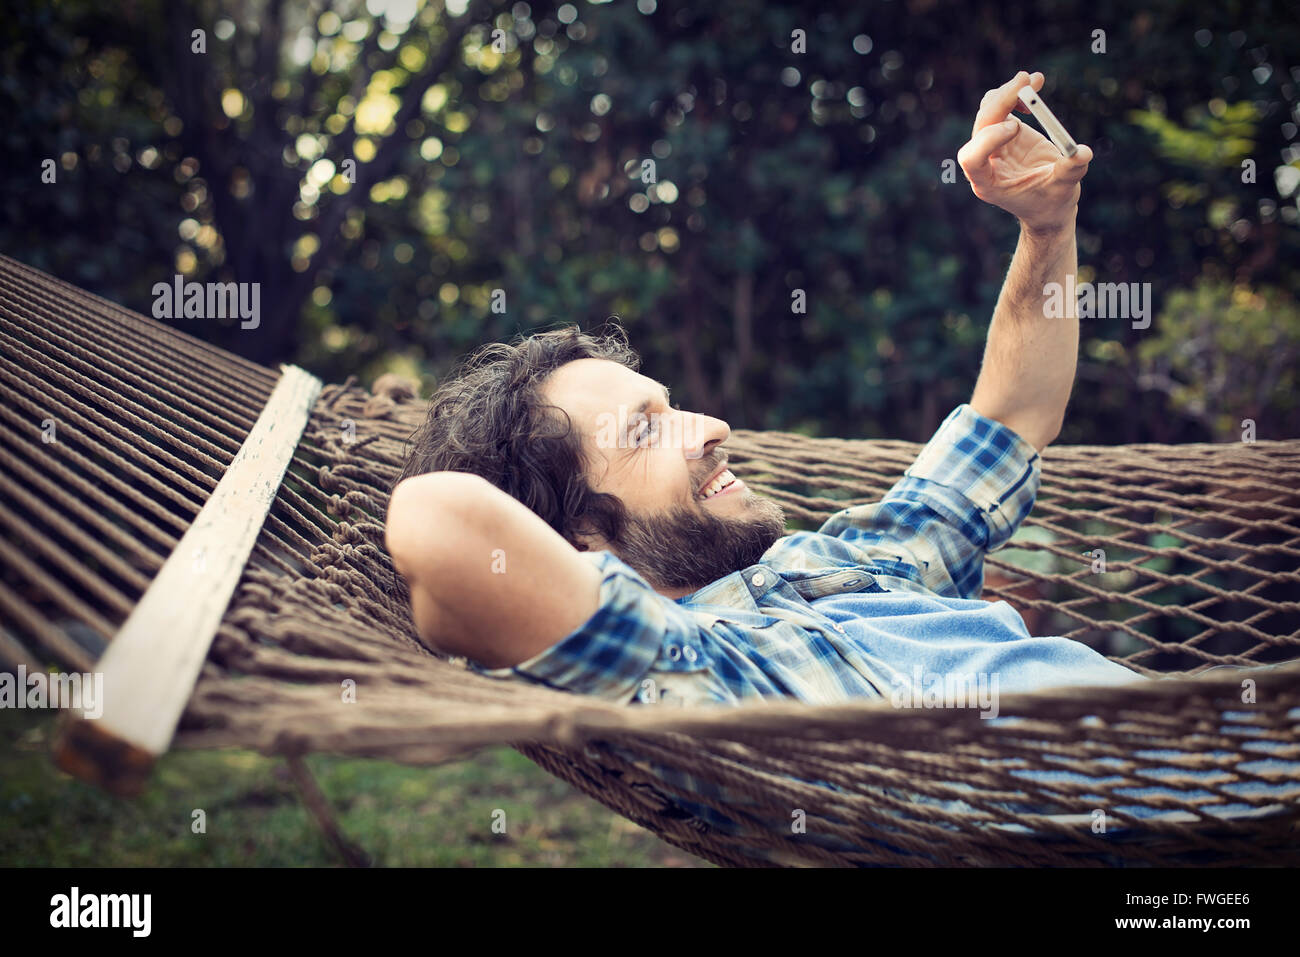 A man lying in a garden hammock taking selfies with his phone. Stock Photo